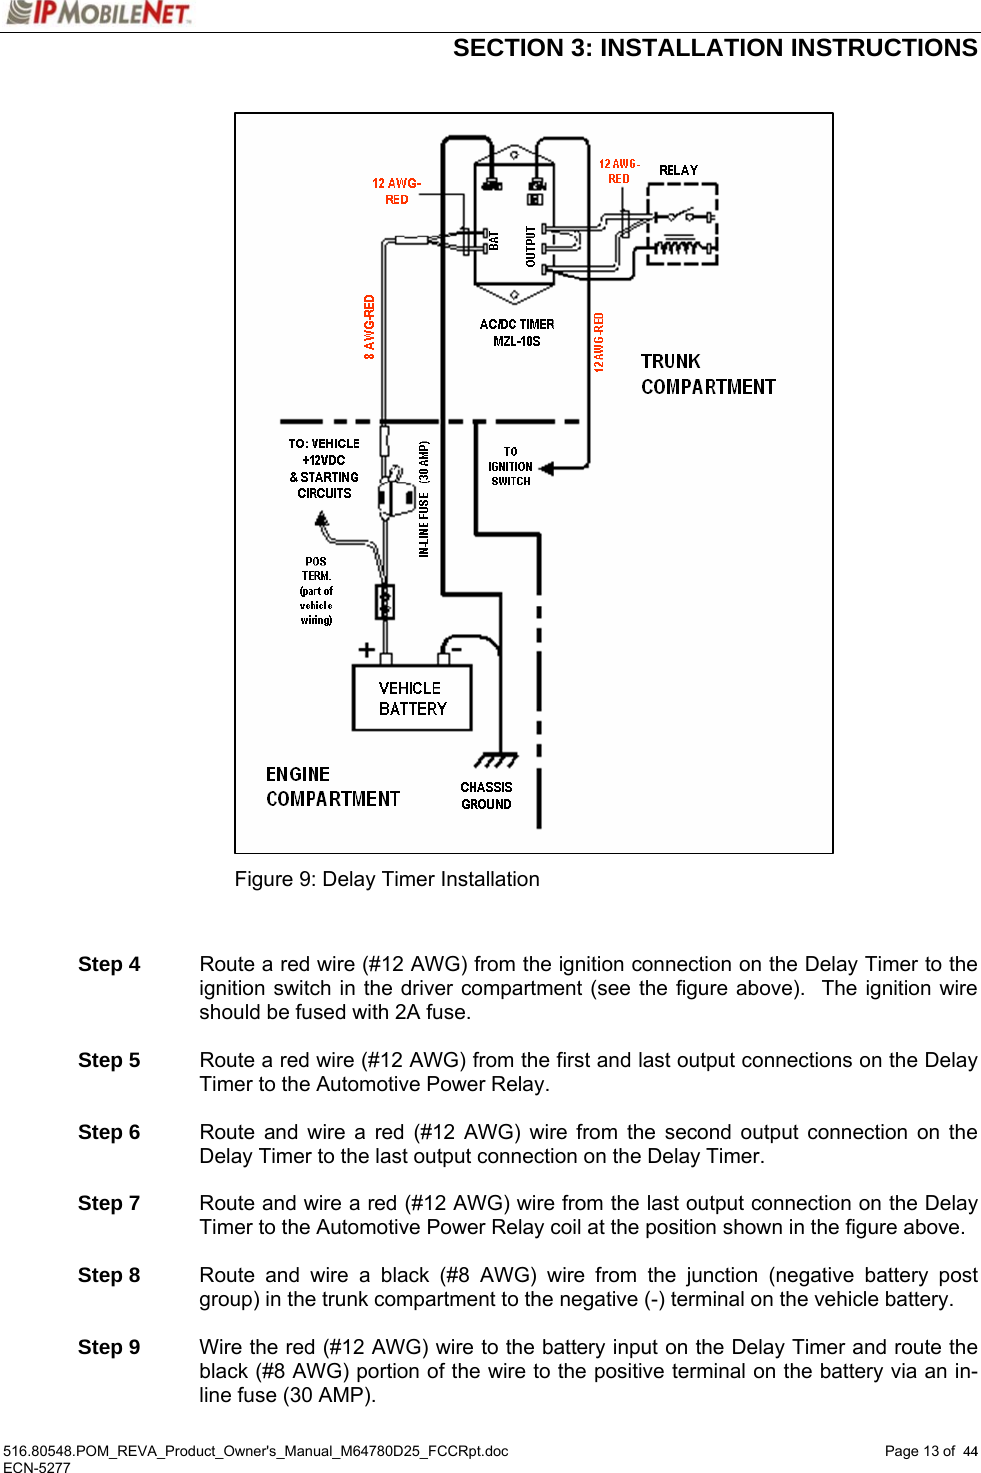  SECTION 3: INSTALLATION INSTRUCTIONS  516.80548.POM_REVA_Product_Owner&apos;s_Manual_M64780D25_FCCRpt.doc Page 13 of  44 ECN-5277  44                              Figure 9: Delay Timer Installation    Step 4  Route a red wire (#12 AWG) from the ignition connection on the Delay Timer to the ignition switch in the driver compartment (see the figure above).  The ignition wire should be fused with 2A fuse.   Step 5  Route a red wire (#12 AWG) from the first and last output connections on the Delay Timer to the Automotive Power Relay.   Step 6  Route and wire a red (#12 AWG) wire from the second output connection on the Delay Timer to the last output connection on the Delay Timer.    Step 7  Route and wire a red (#12 AWG) wire from the last output connection on the Delay Timer to the Automotive Power Relay coil at the position shown in the figure above.   Step 8  Route and wire a black (#8 AWG) wire from the junction (negative battery post group) in the trunk compartment to the negative (-) terminal on the vehicle battery.   Step 9  Wire the red (#12 AWG) wire to the battery input on the Delay Timer and route the black (#8 AWG) portion of the wire to the positive terminal on the battery via an in-line fuse (30 AMP). 